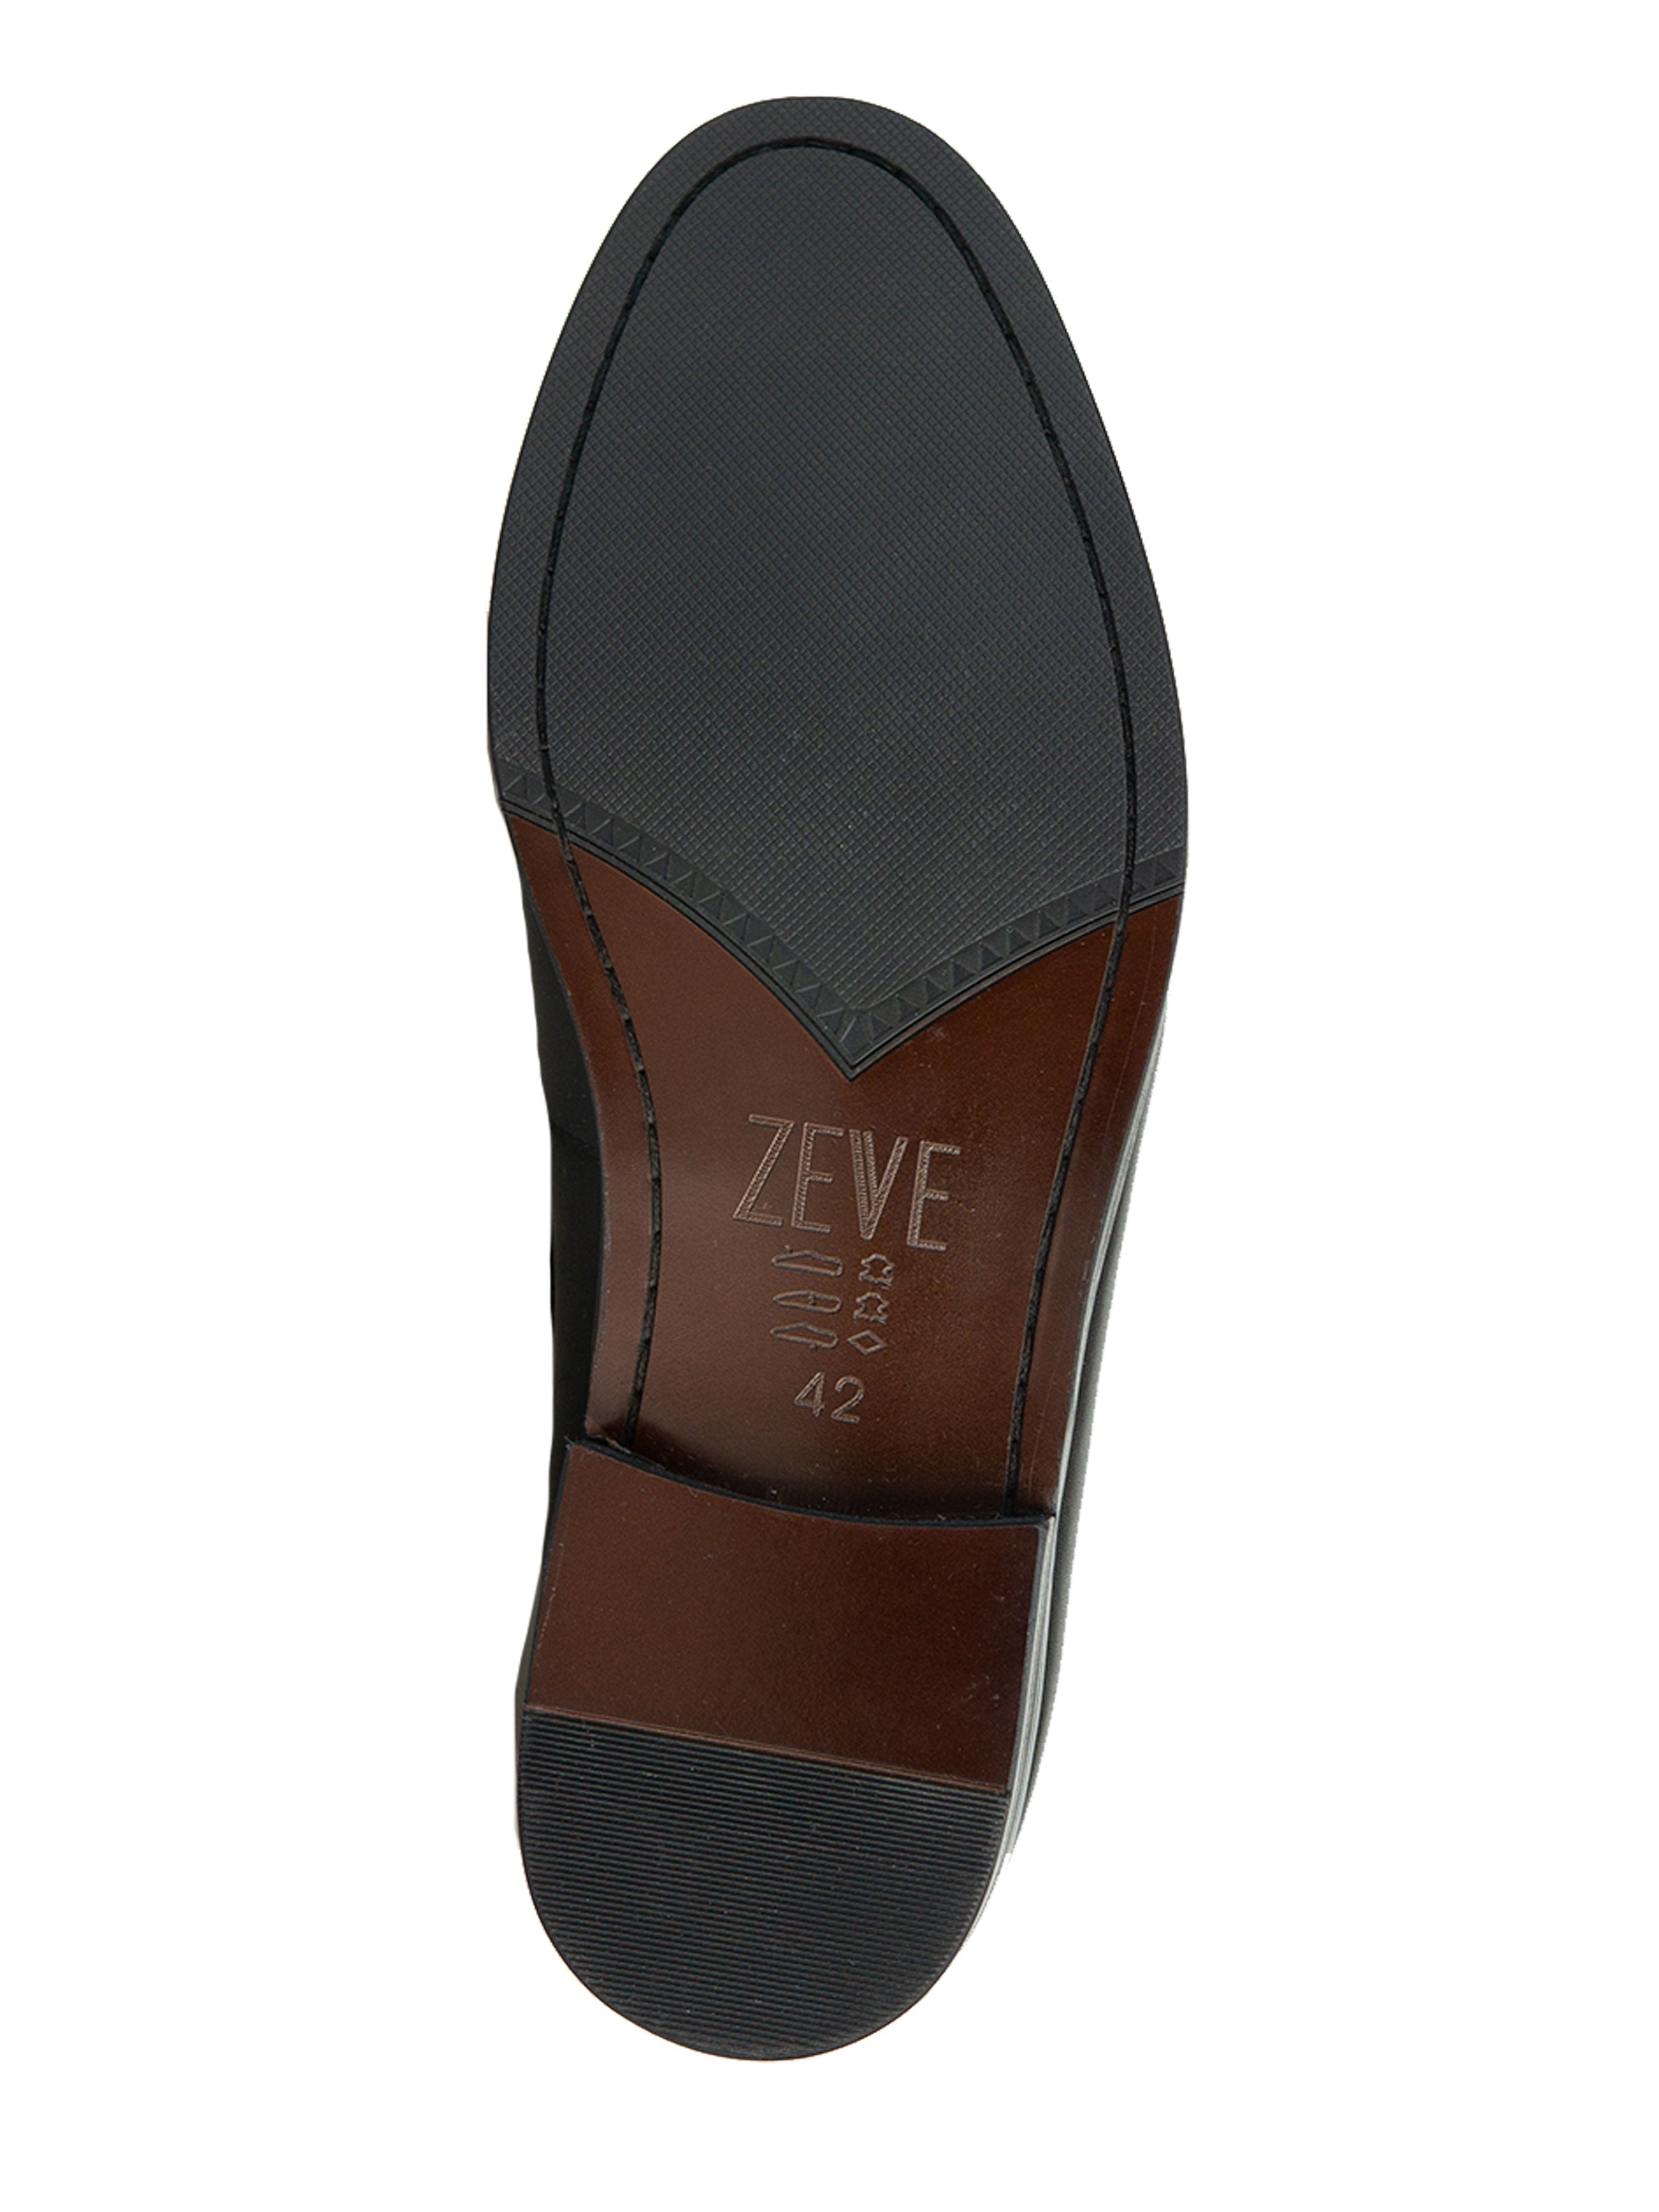 Belgian Loafer - Dark Brown Phyton Penny Strap with Studded Fringe (Hand Painted Patina) - Zeve Shoes